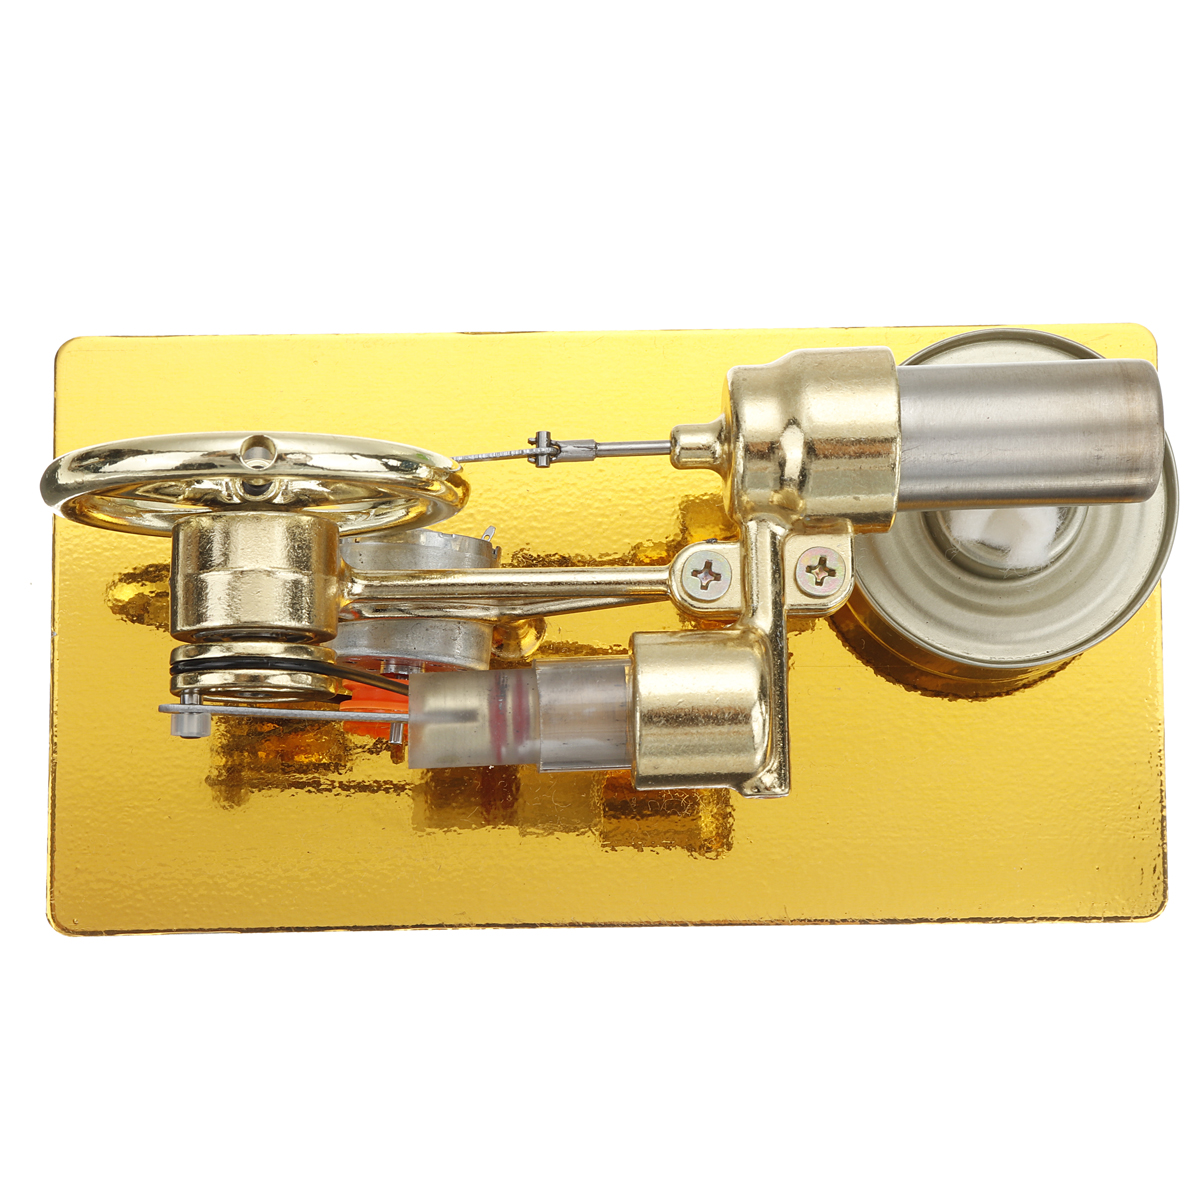 1PC-16-x-85-x-11-cm--Physical-Science-DIY-Kits-Stirling-Engine-Model-with-Parts-1939762-1